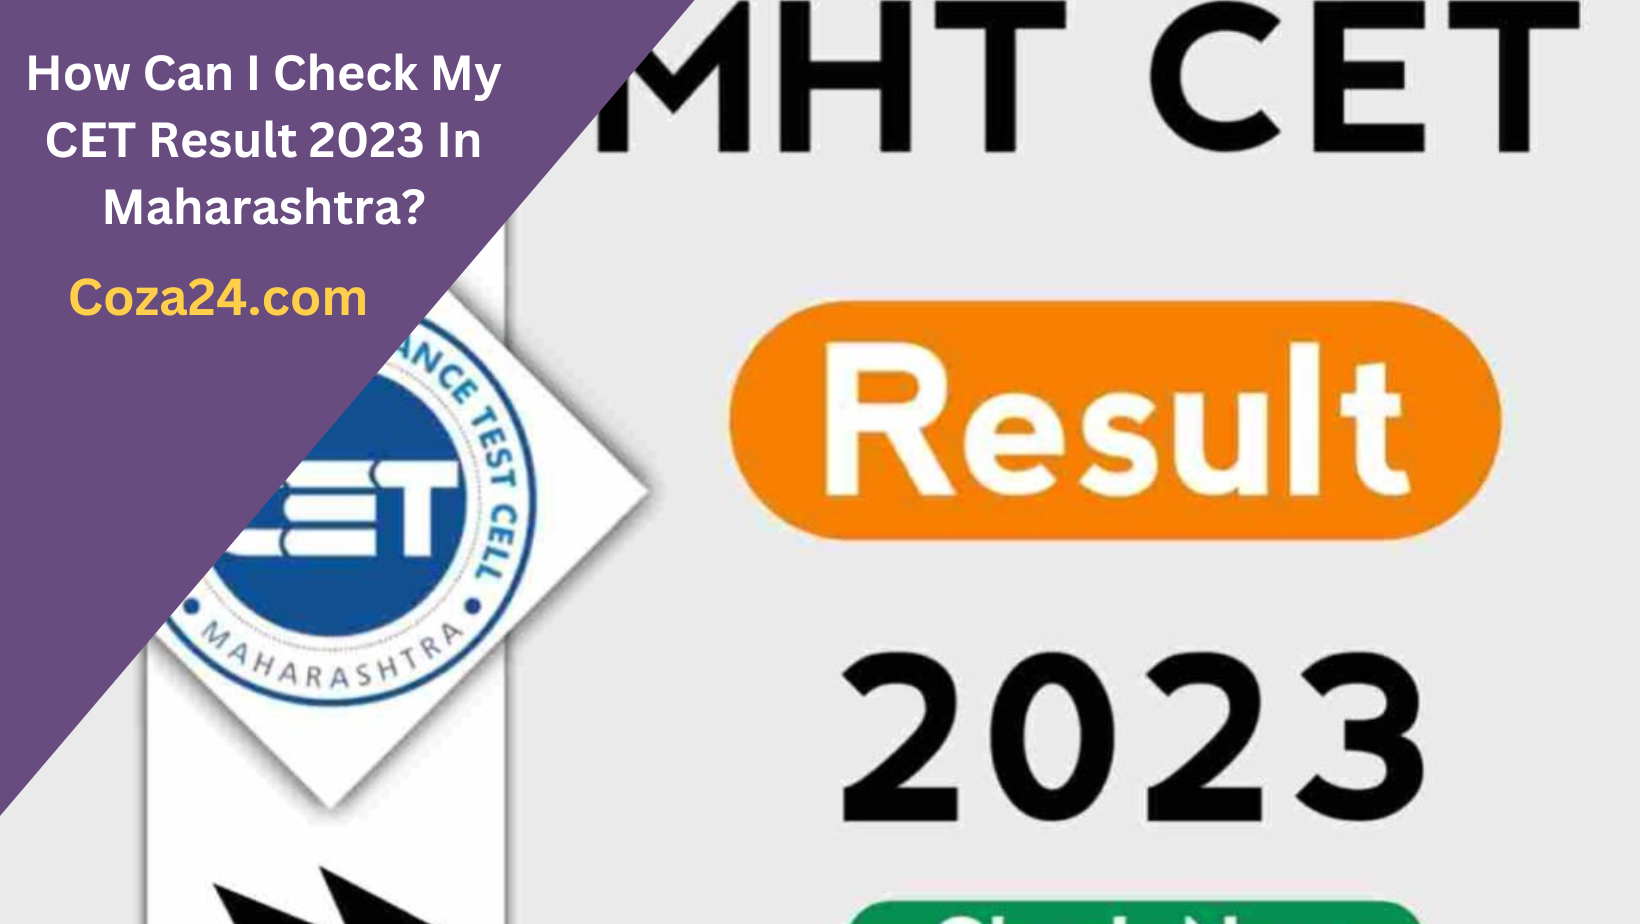 How Can I Check My CET Result 2023 In Maharashtra?